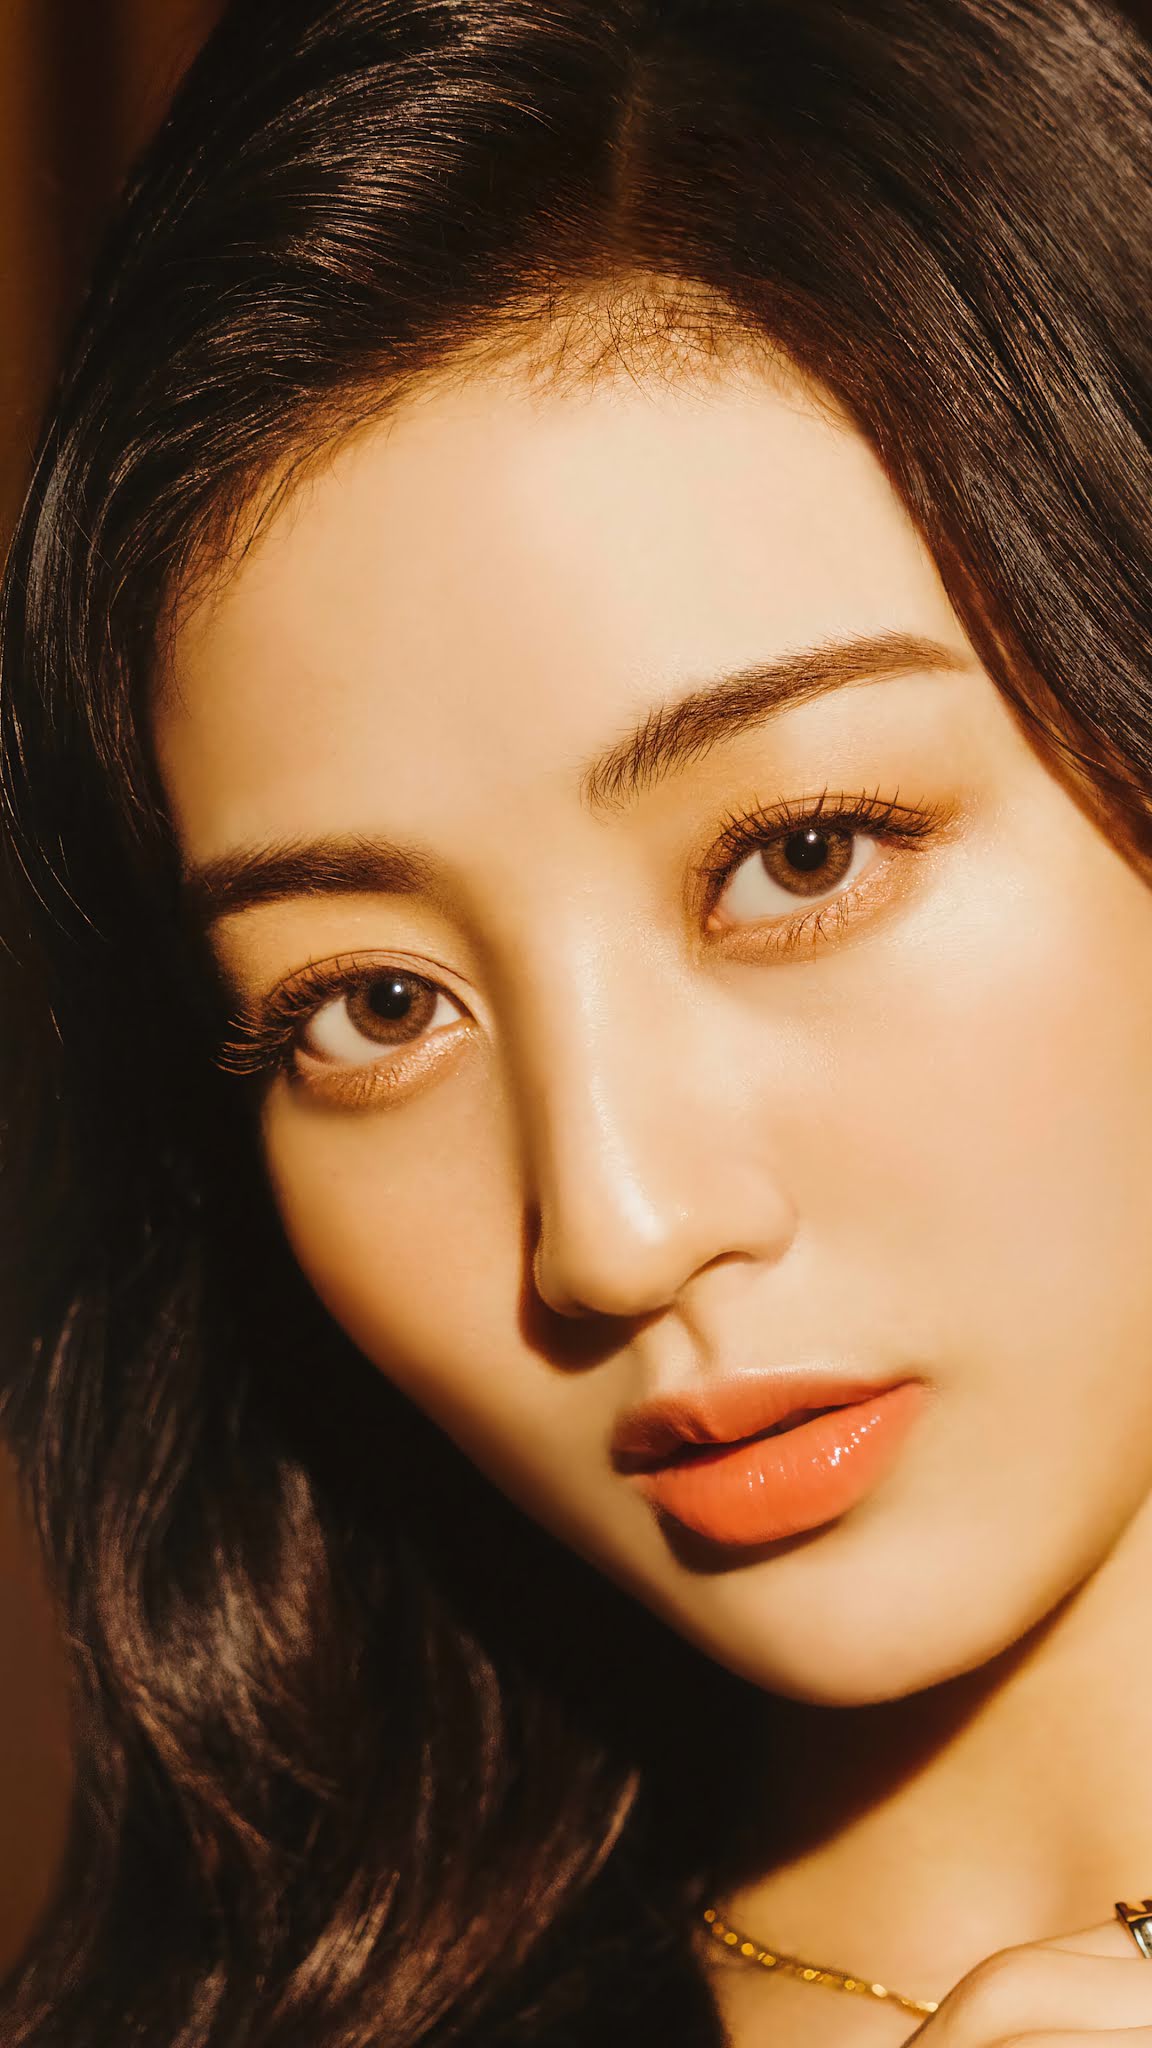 TWICE Perfect World Jihyo Android And iPhone Wallpapers